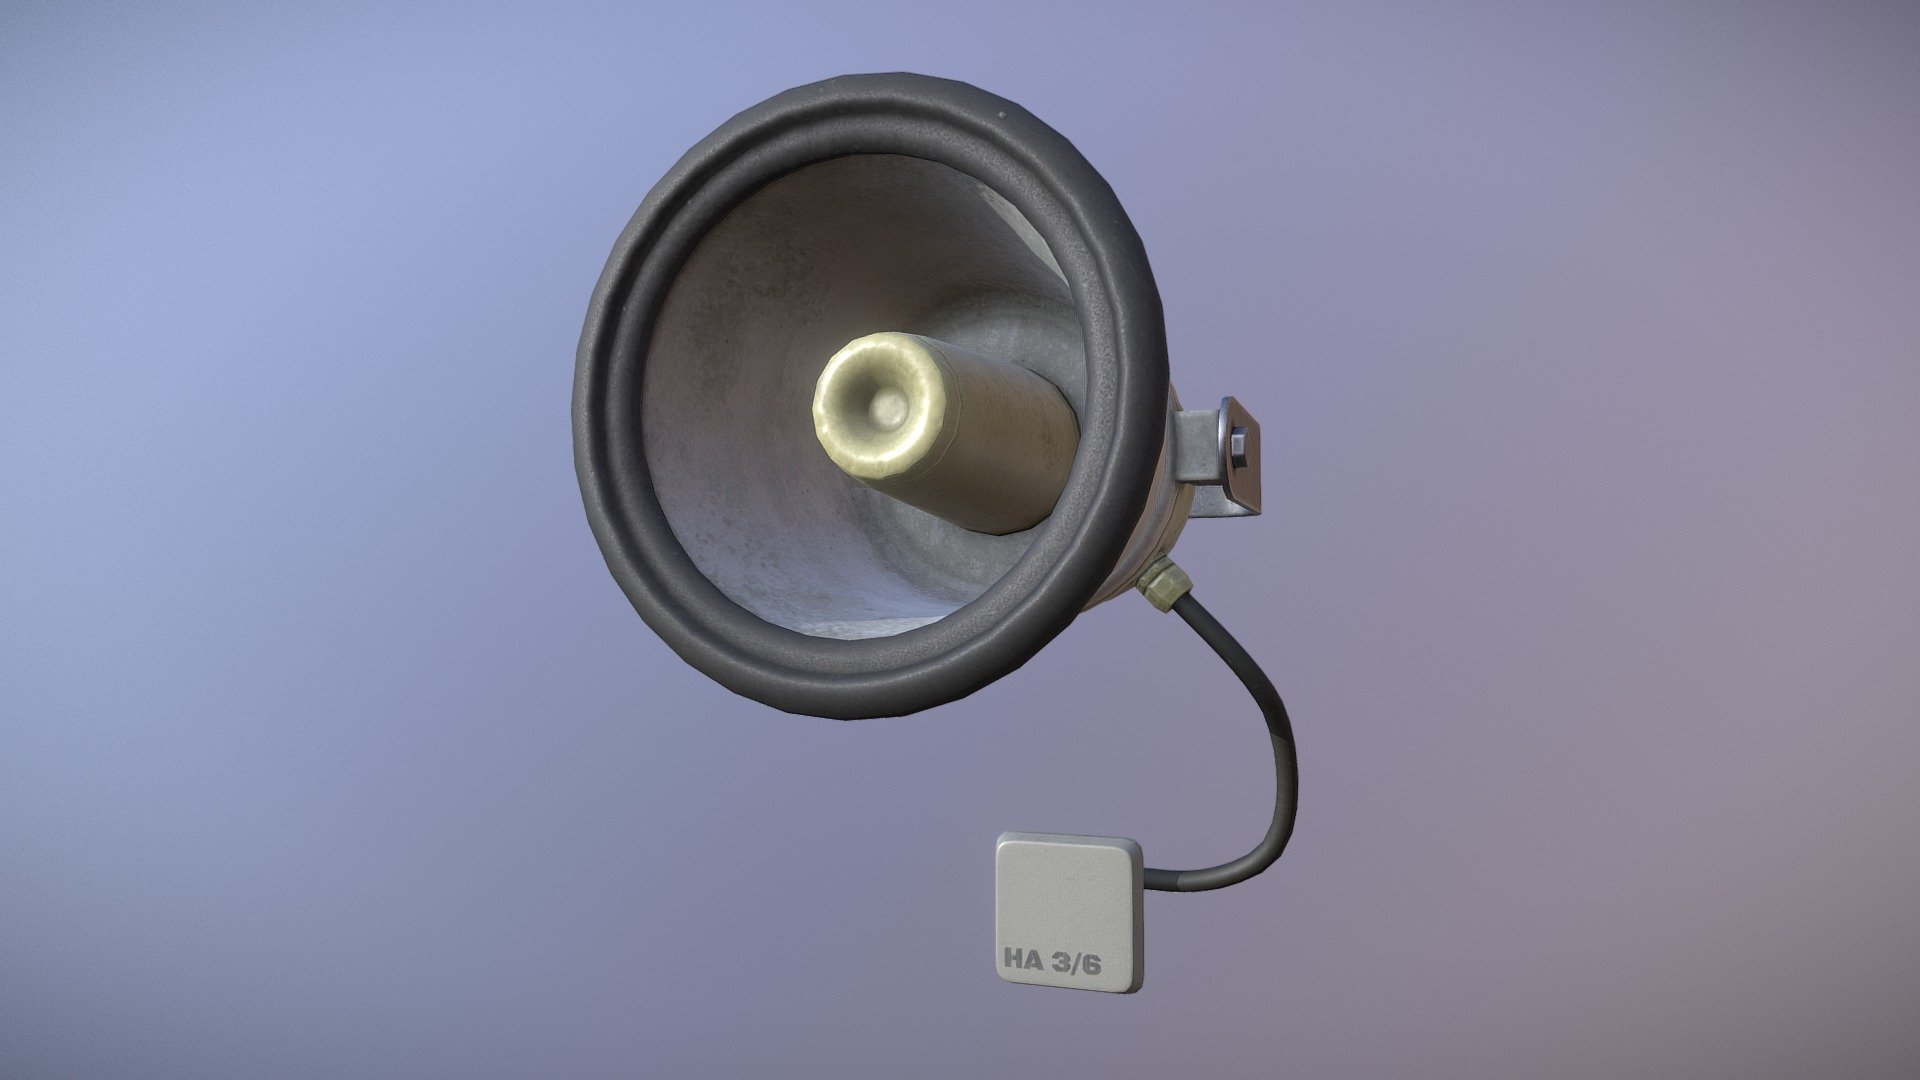 Game Ready/Realtime loudspeaker.

High quality model ready for use in game engines and other real-time applications!

Originally modeled in 3ds Max 2018. Download includes .max, .fbx, .obj, 1024x1024 metal/roughness PBR textures, specular/gloss PBR textures, textures for Unity and Unreal Engines, and additional texture maps such as curvature, AO, and color ID.

Substance Painter source file also included to make it easier to alter the texture, if you so desire 3d model